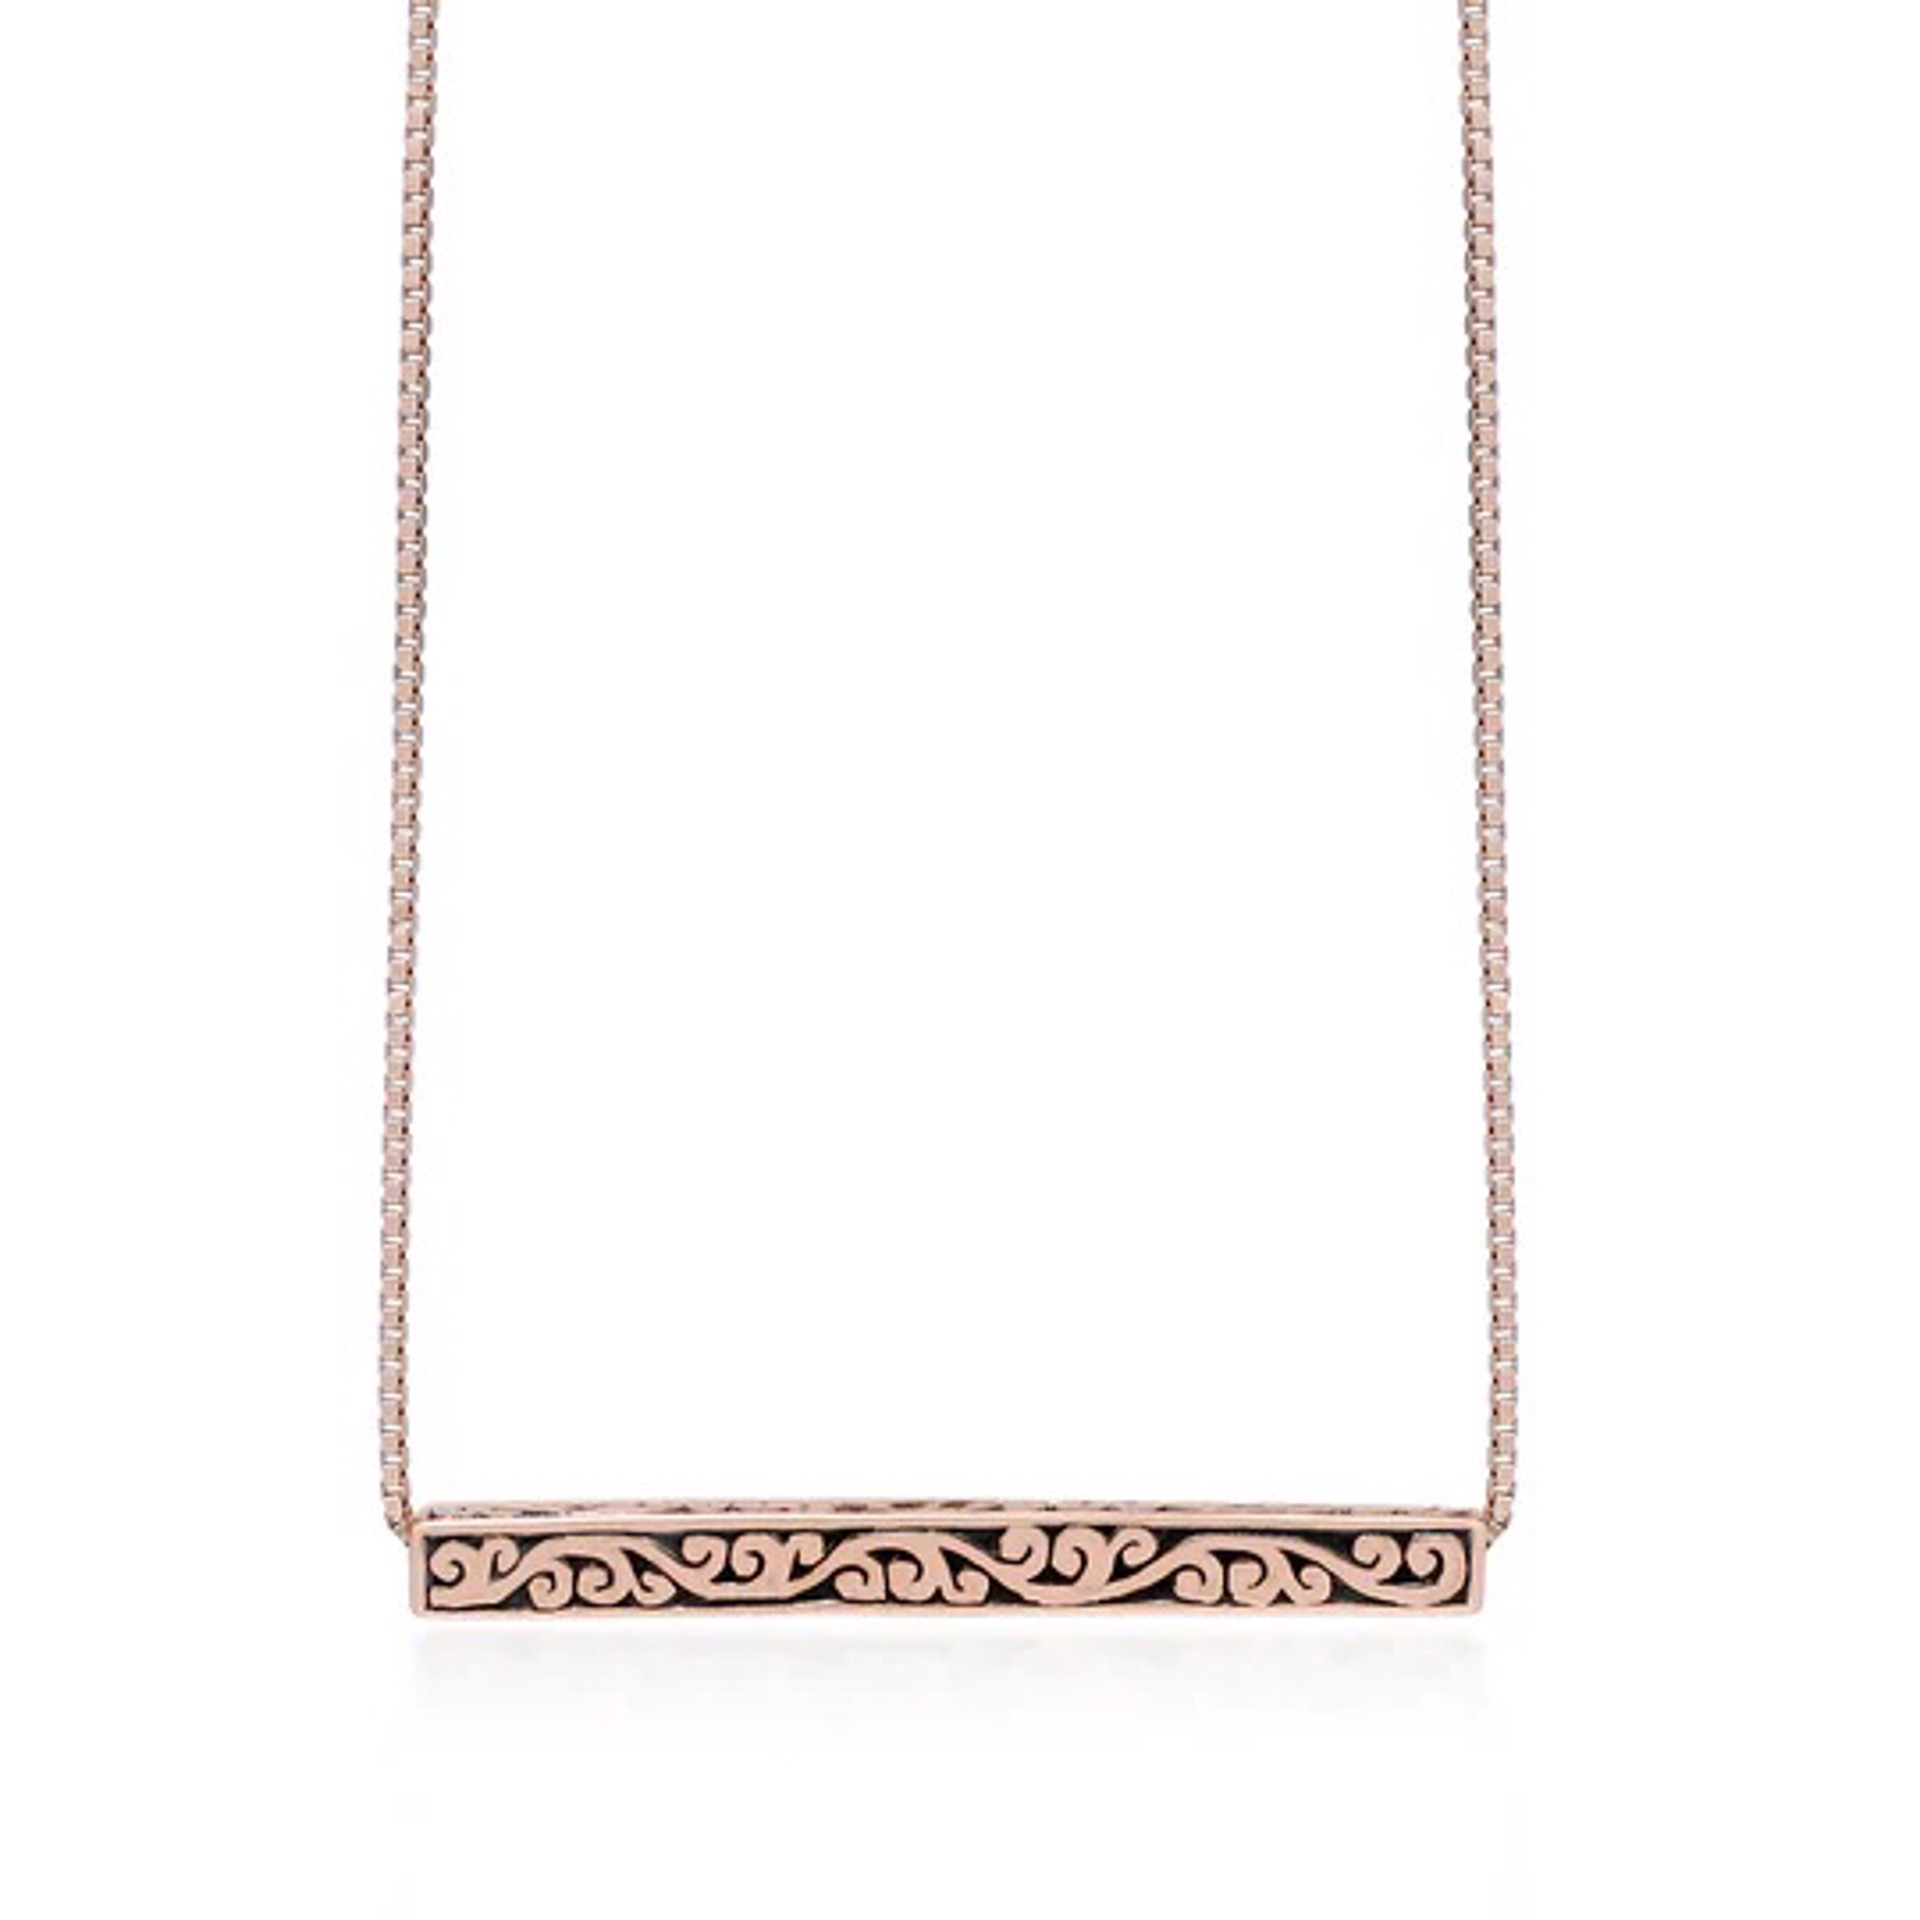 18K Rose Gold Bar with Intricate Lois Hill Signature Scroll Necklace with Adjustable Chain by Lois Hill